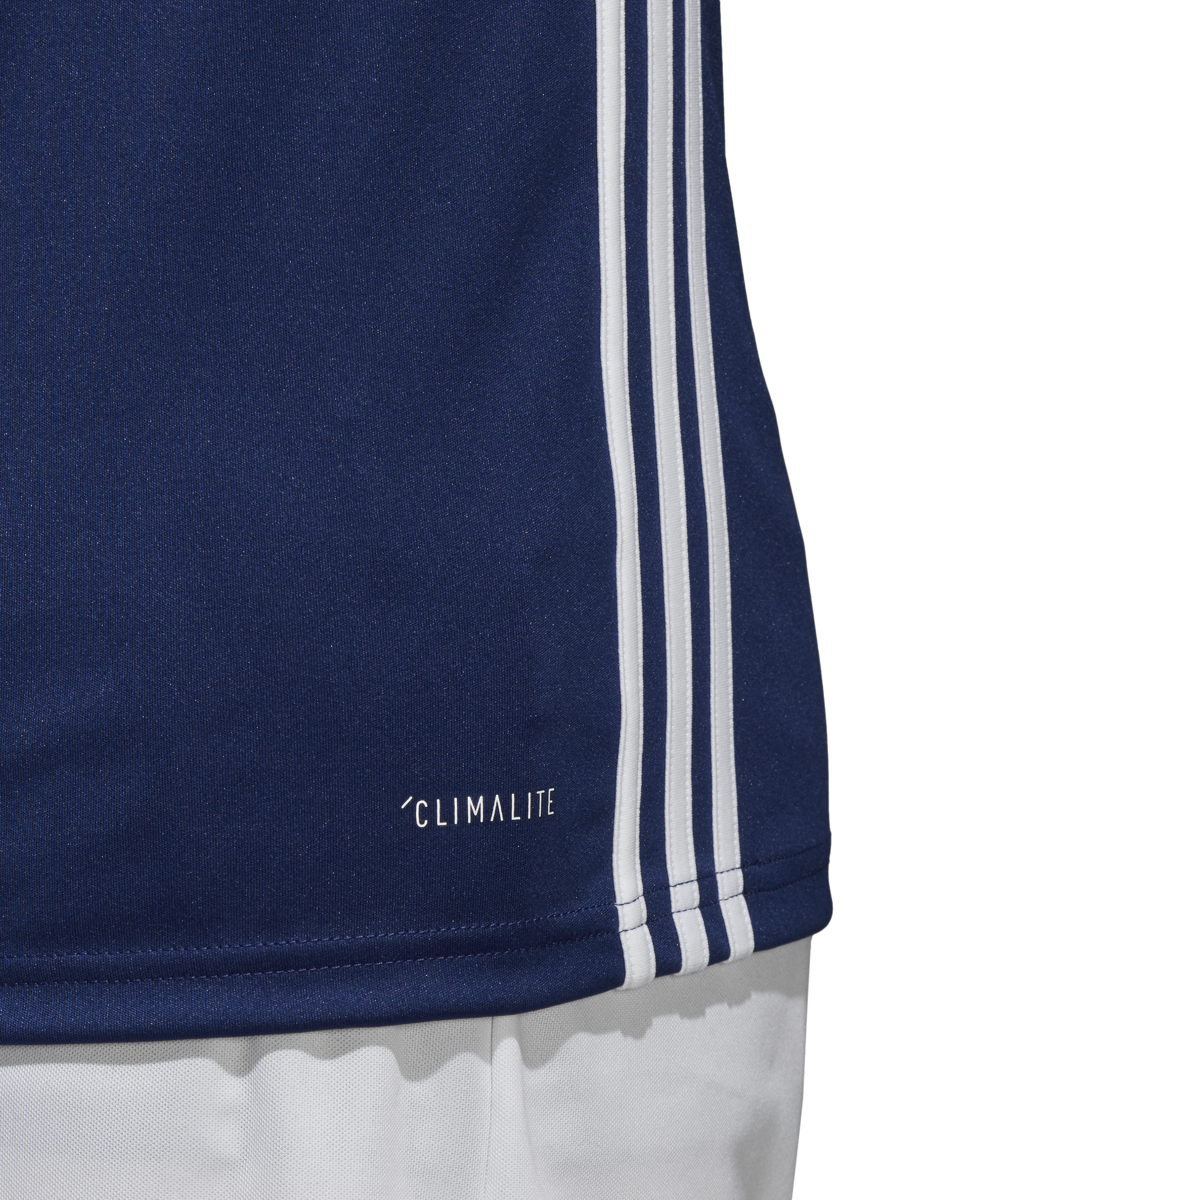 Adidas Mens Soccer Regista 18 Jersey Adidas - Ships Directly From Adidas - image 5 of 6